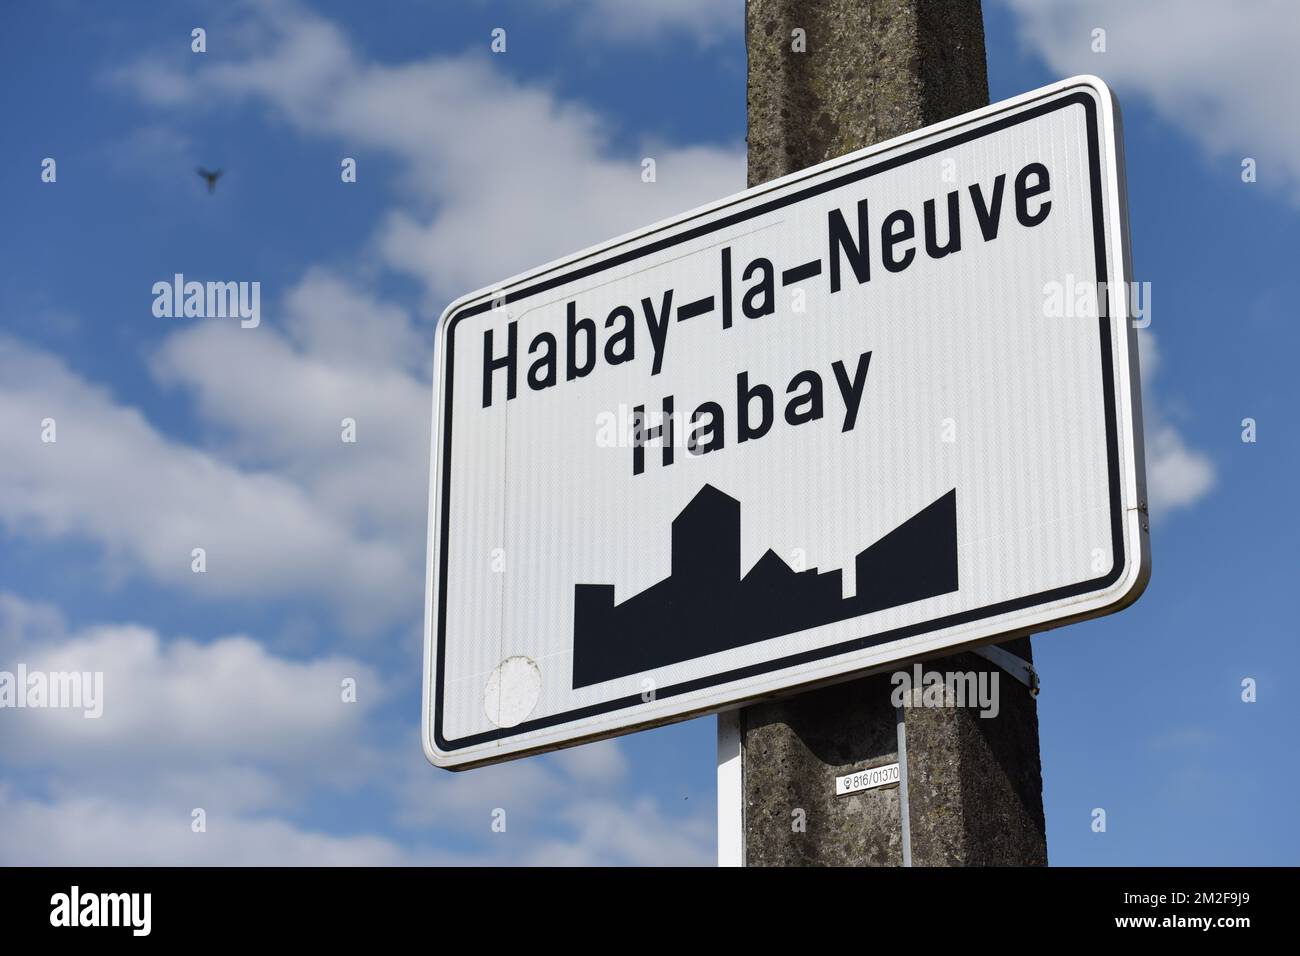 Illustration shows the name of the Habay-la-Neuve Habay municipality on a  road sign, Wednesday 16 May 2018. BELGA PHOTO JEAN-LUC FLEMAL Stock Photo -  Alamy